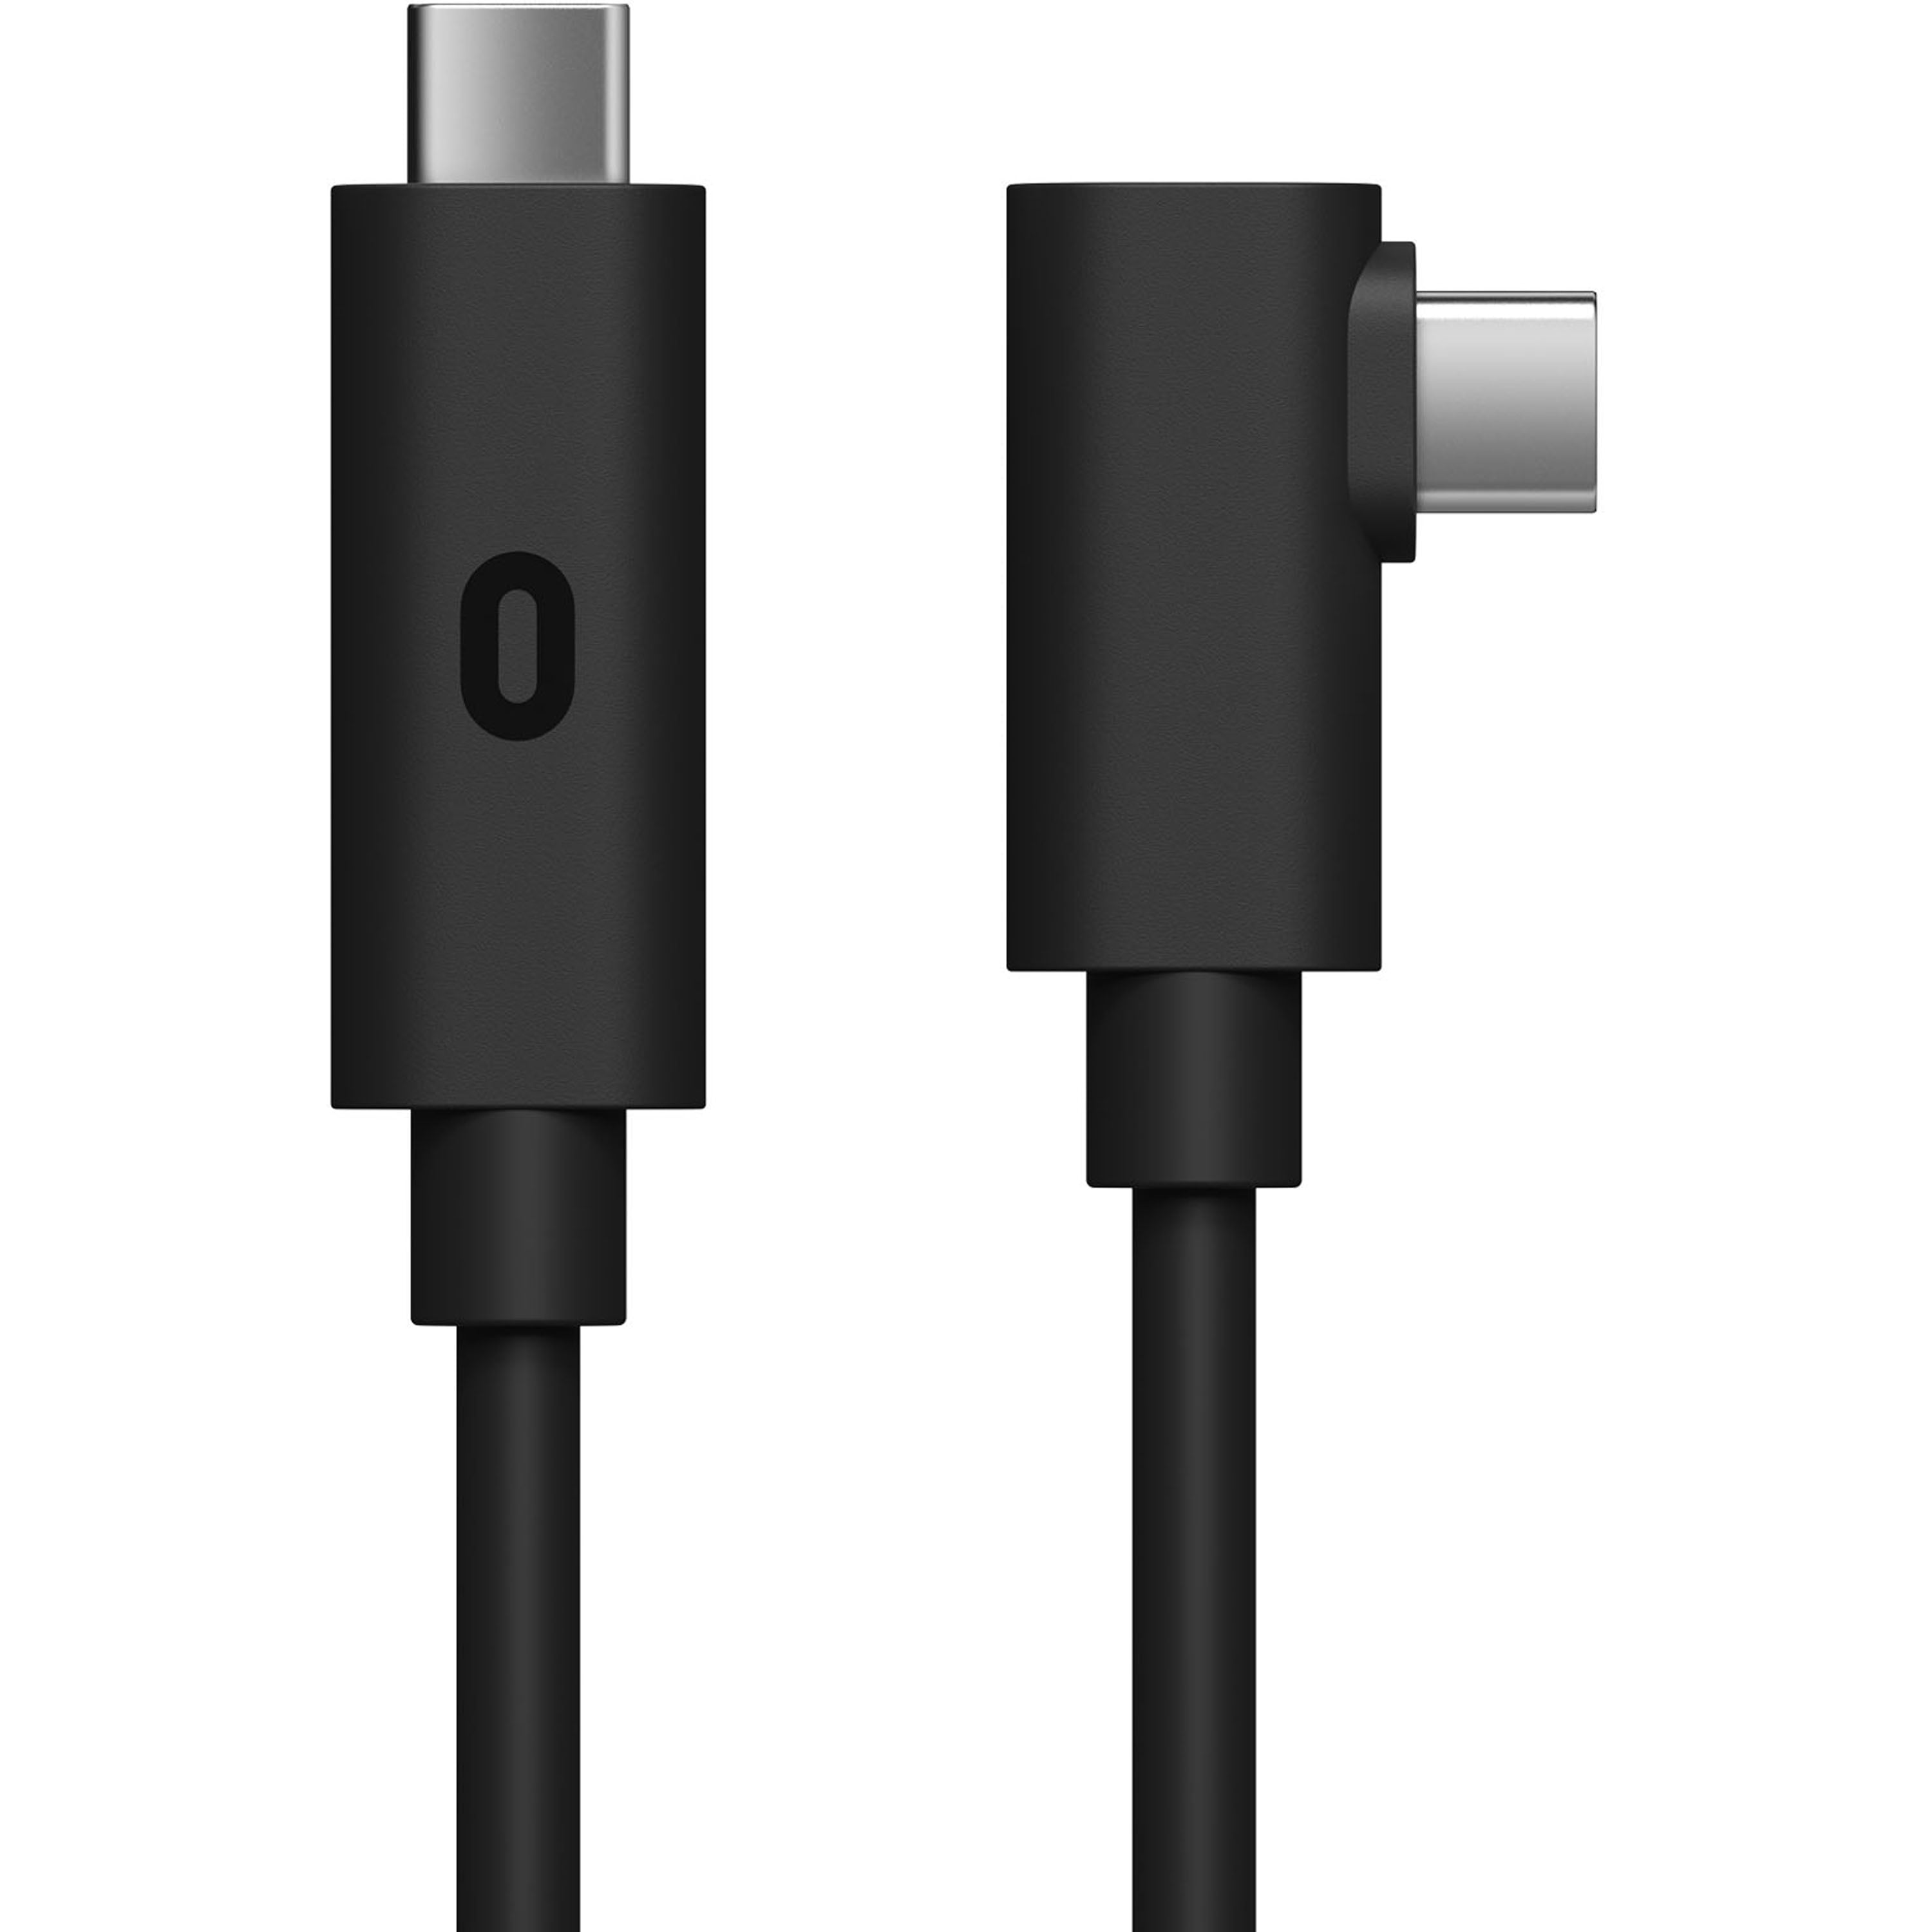 oculus link cable stock